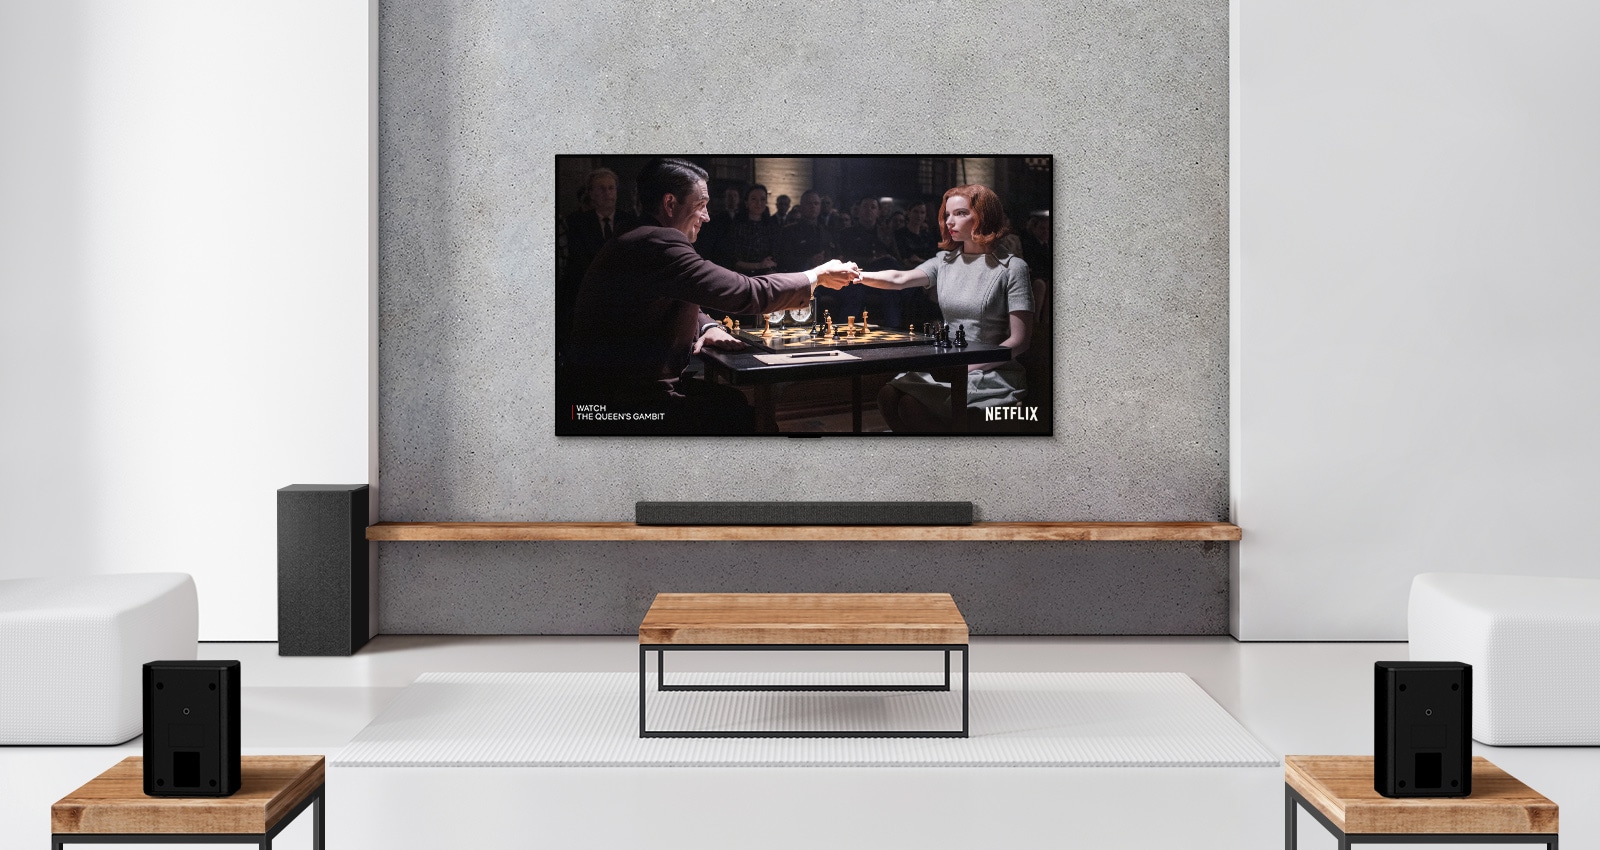 A set of 2 rear speakers, subwoofer, and a soundbar, and TV are in a white living room. A poster of a TV show is on TV screen. 